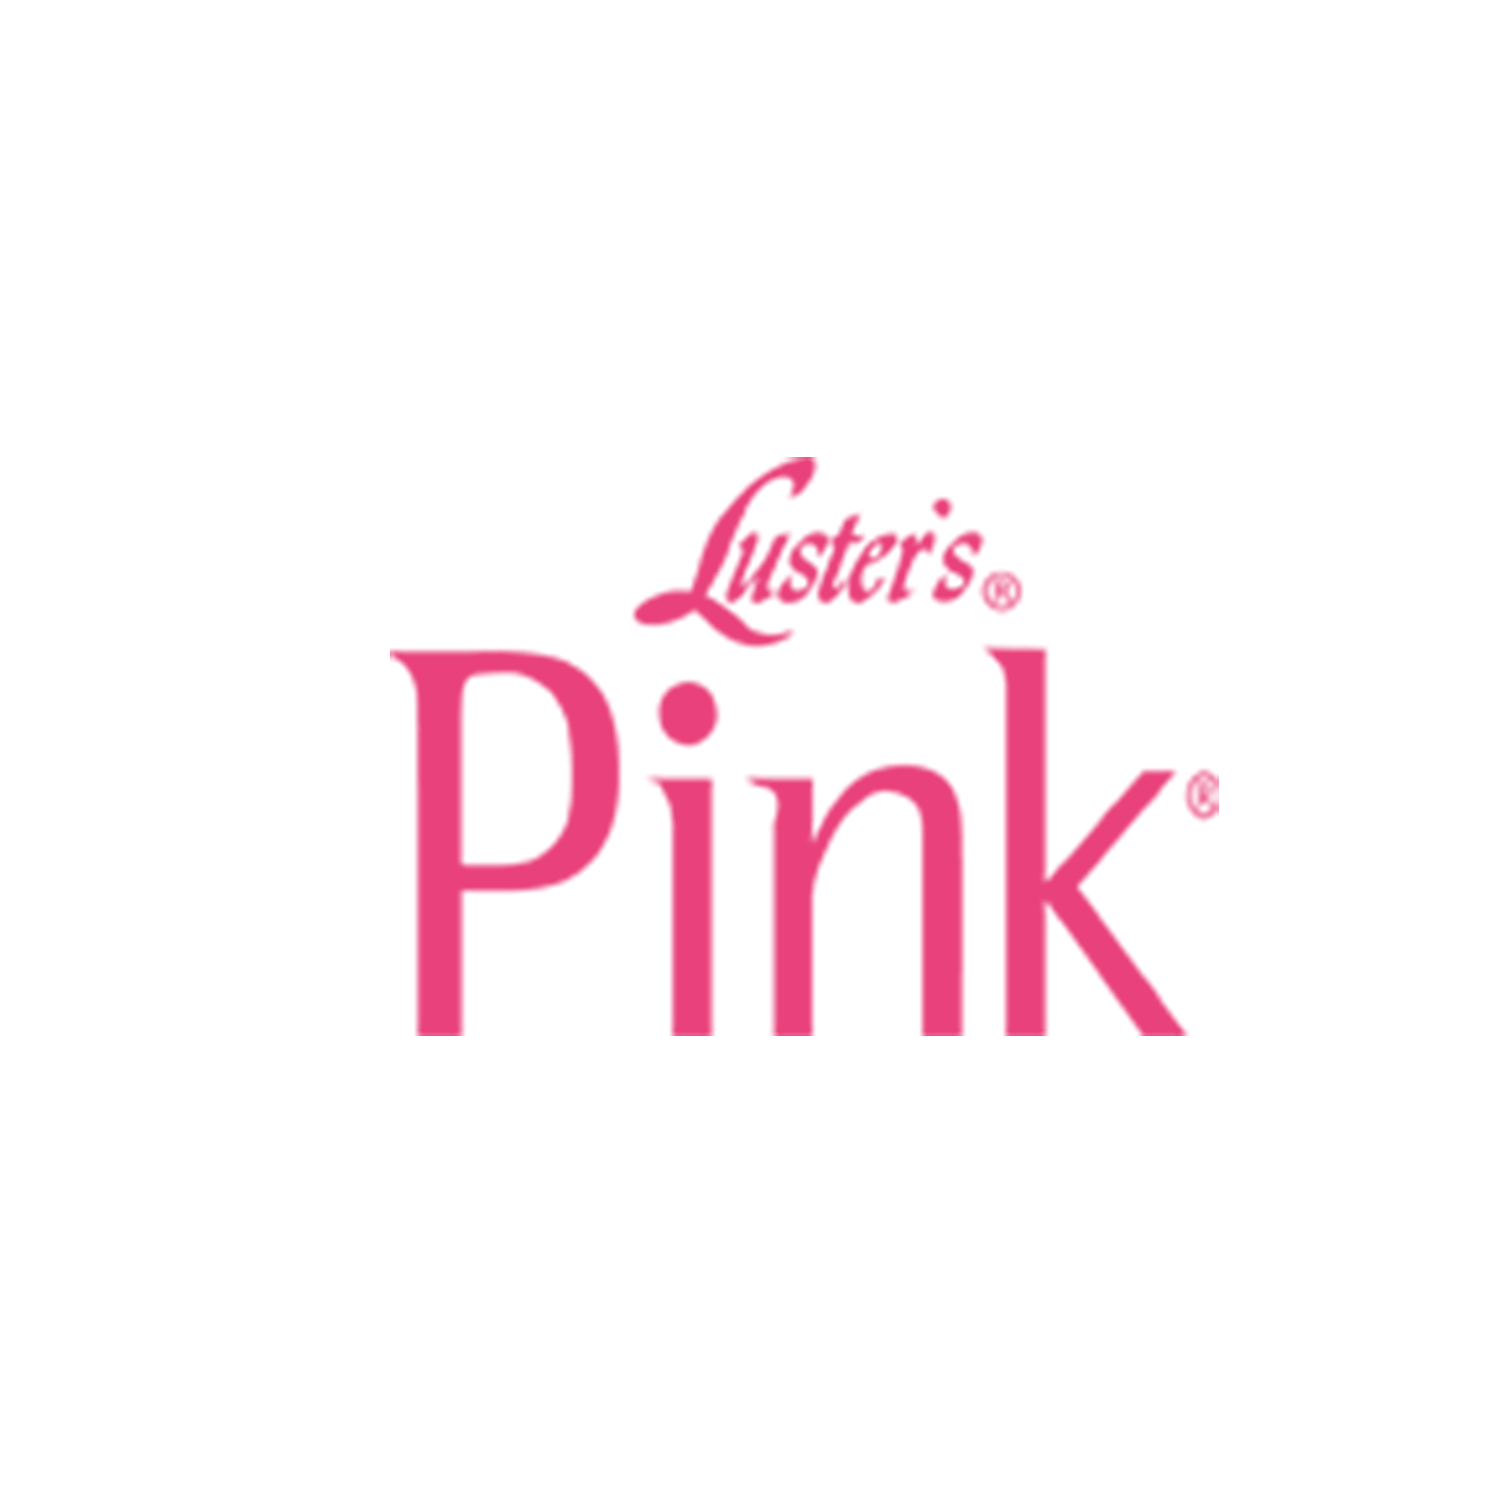  Luster's Pink